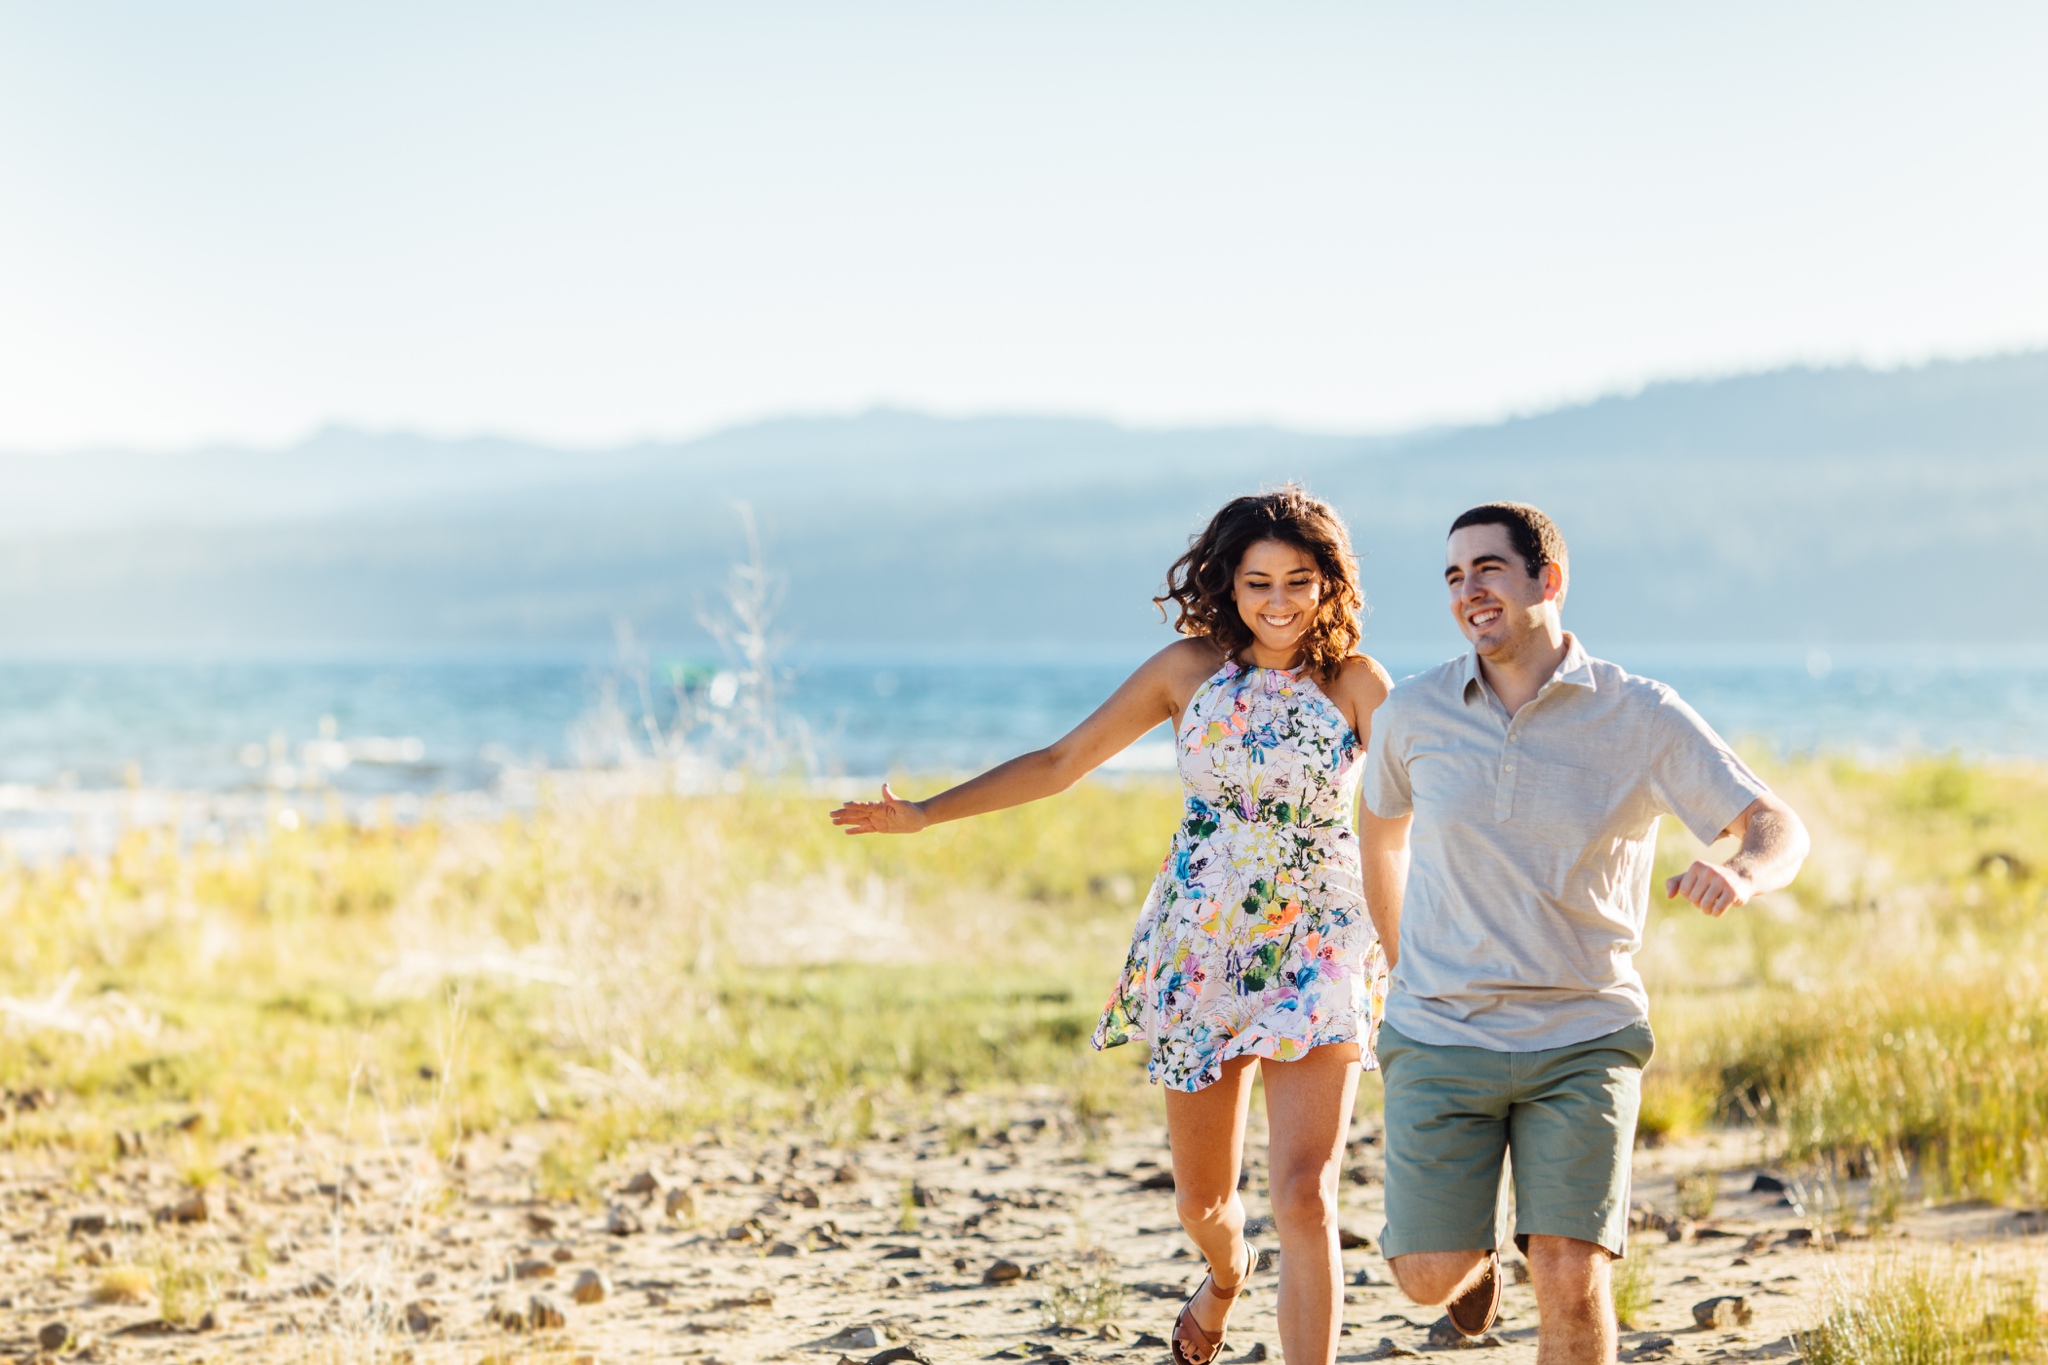 thedelauras_ostaraphotography_laketahoeengagement_laketahoeweddingphotograph_laketahoe_photographer_018